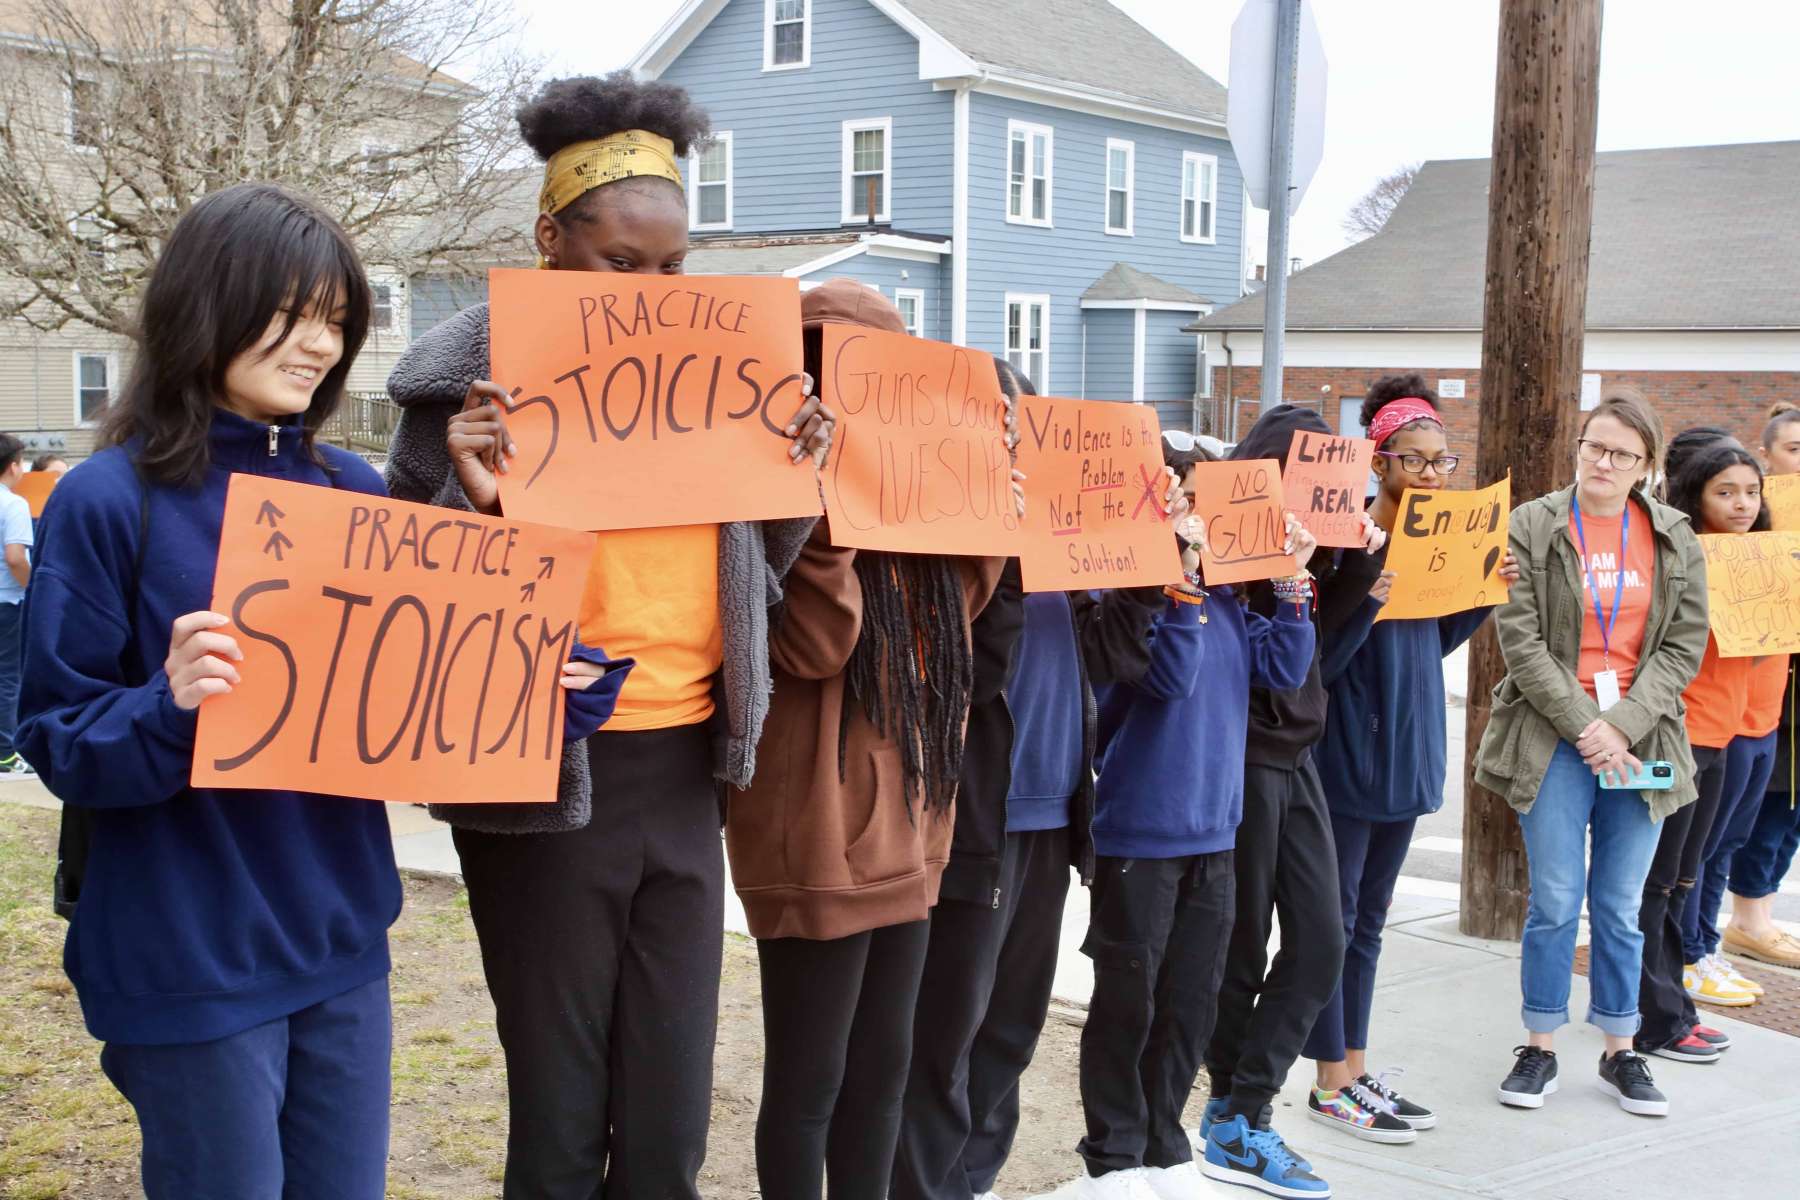 Rhode Island News: United in protest: Central Falls students join nationwide walkout for gun violence